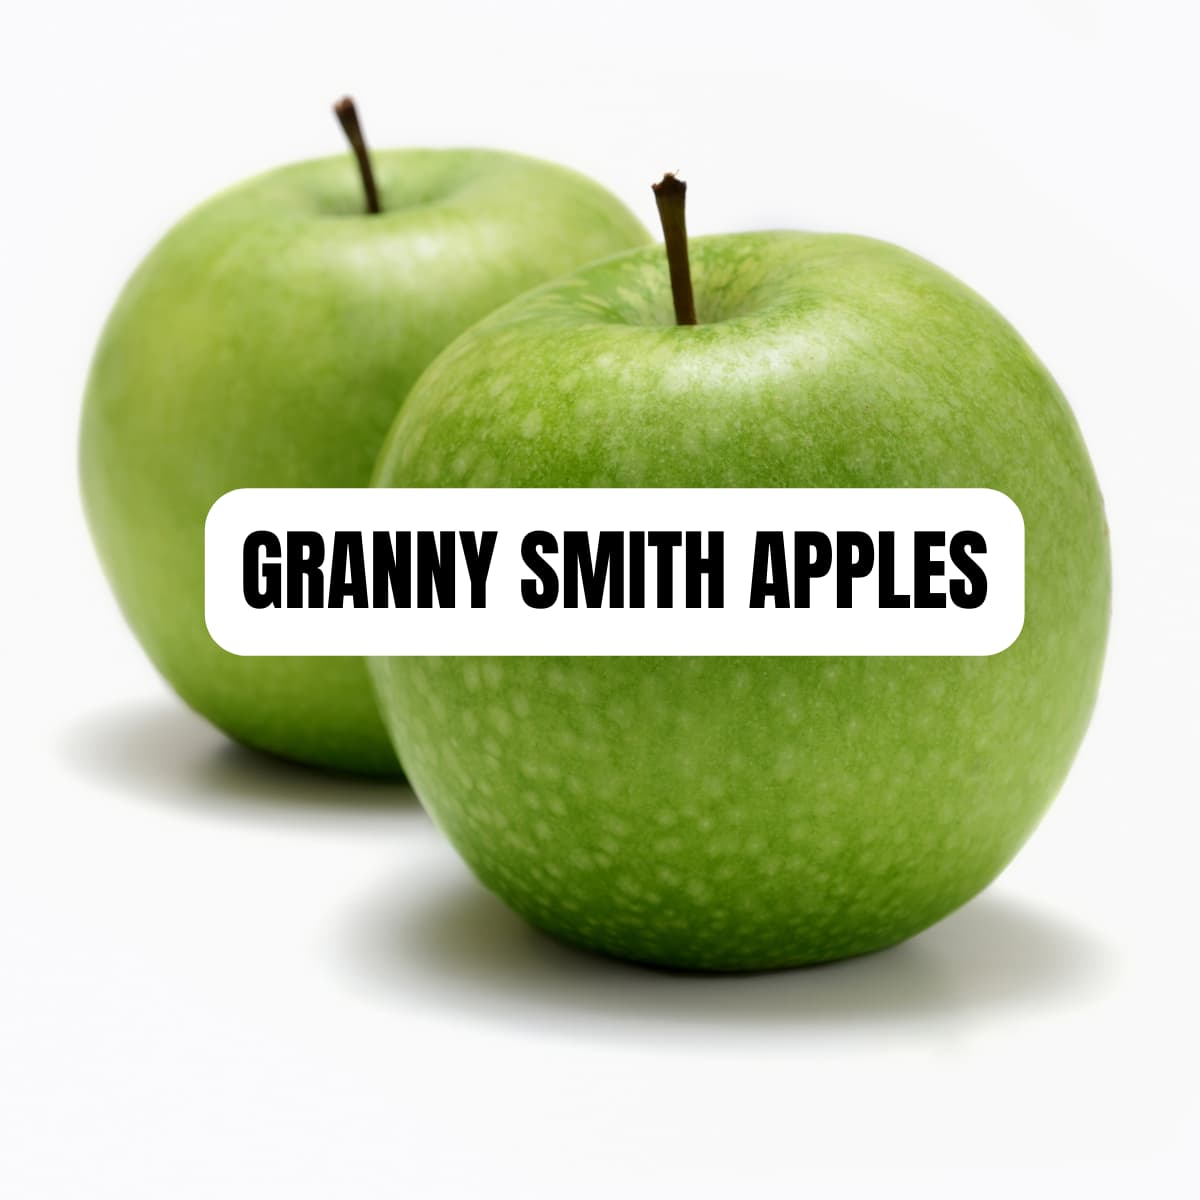 Two granny smith apples on a counter with text overlay.